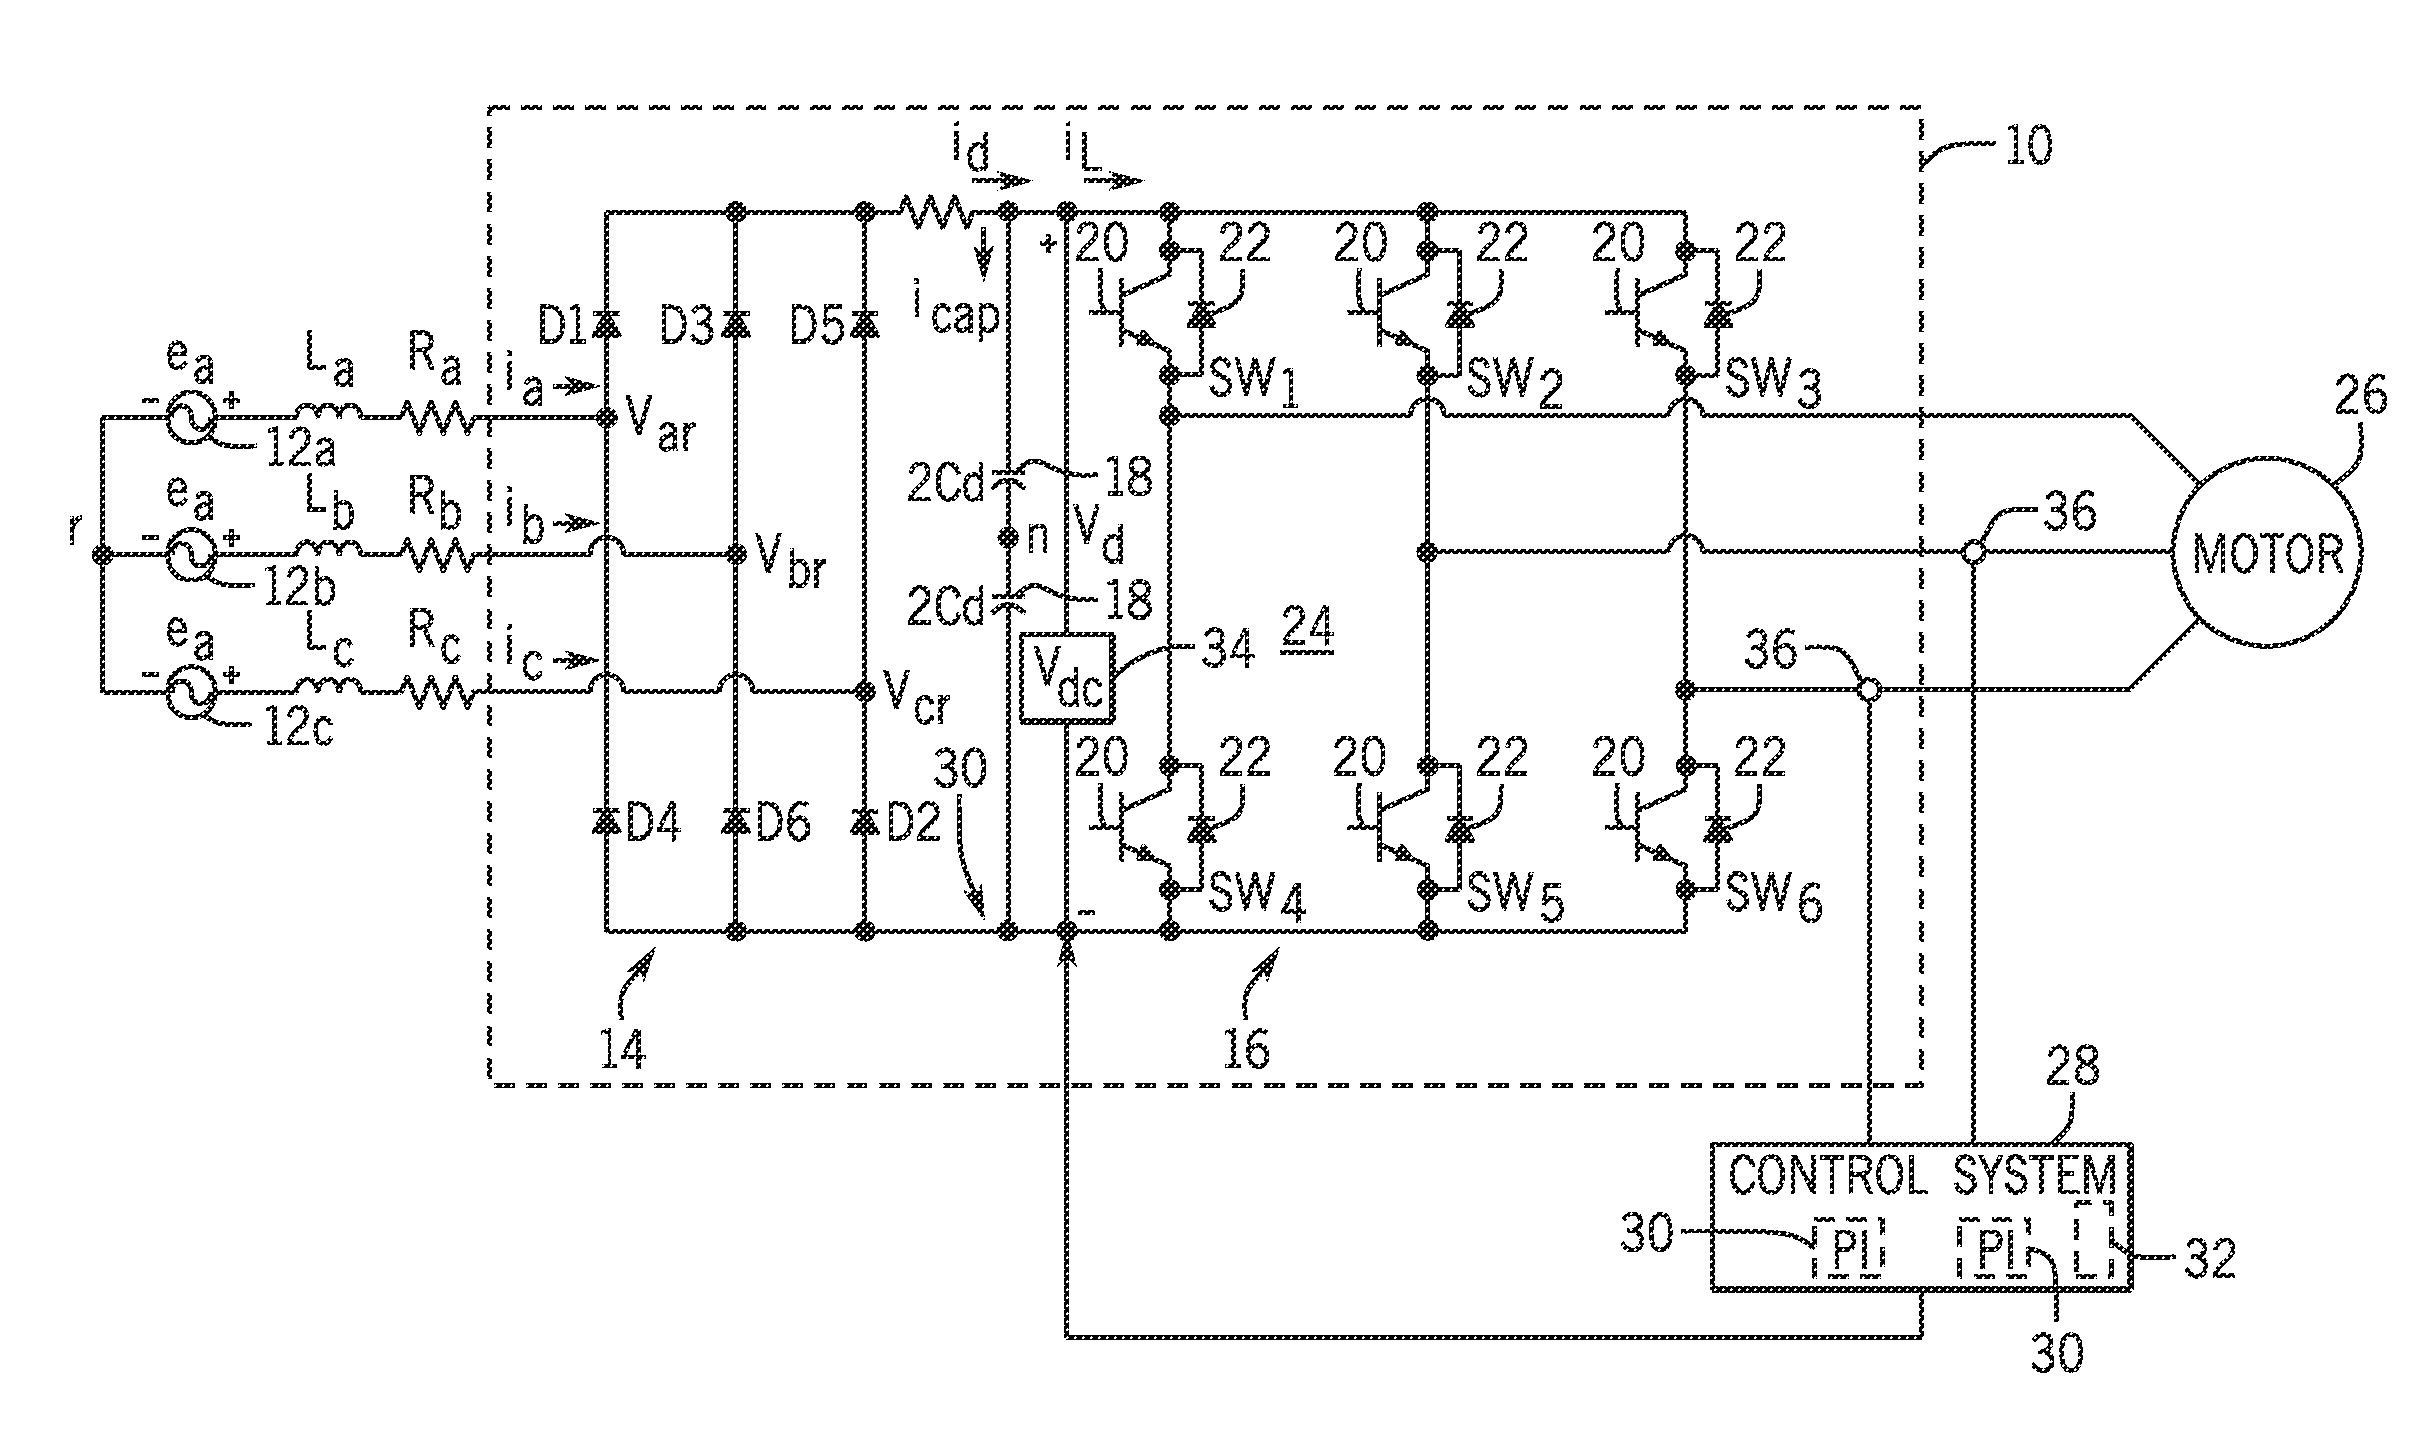 System and method of rotor time constant online identification in an ac induction machine